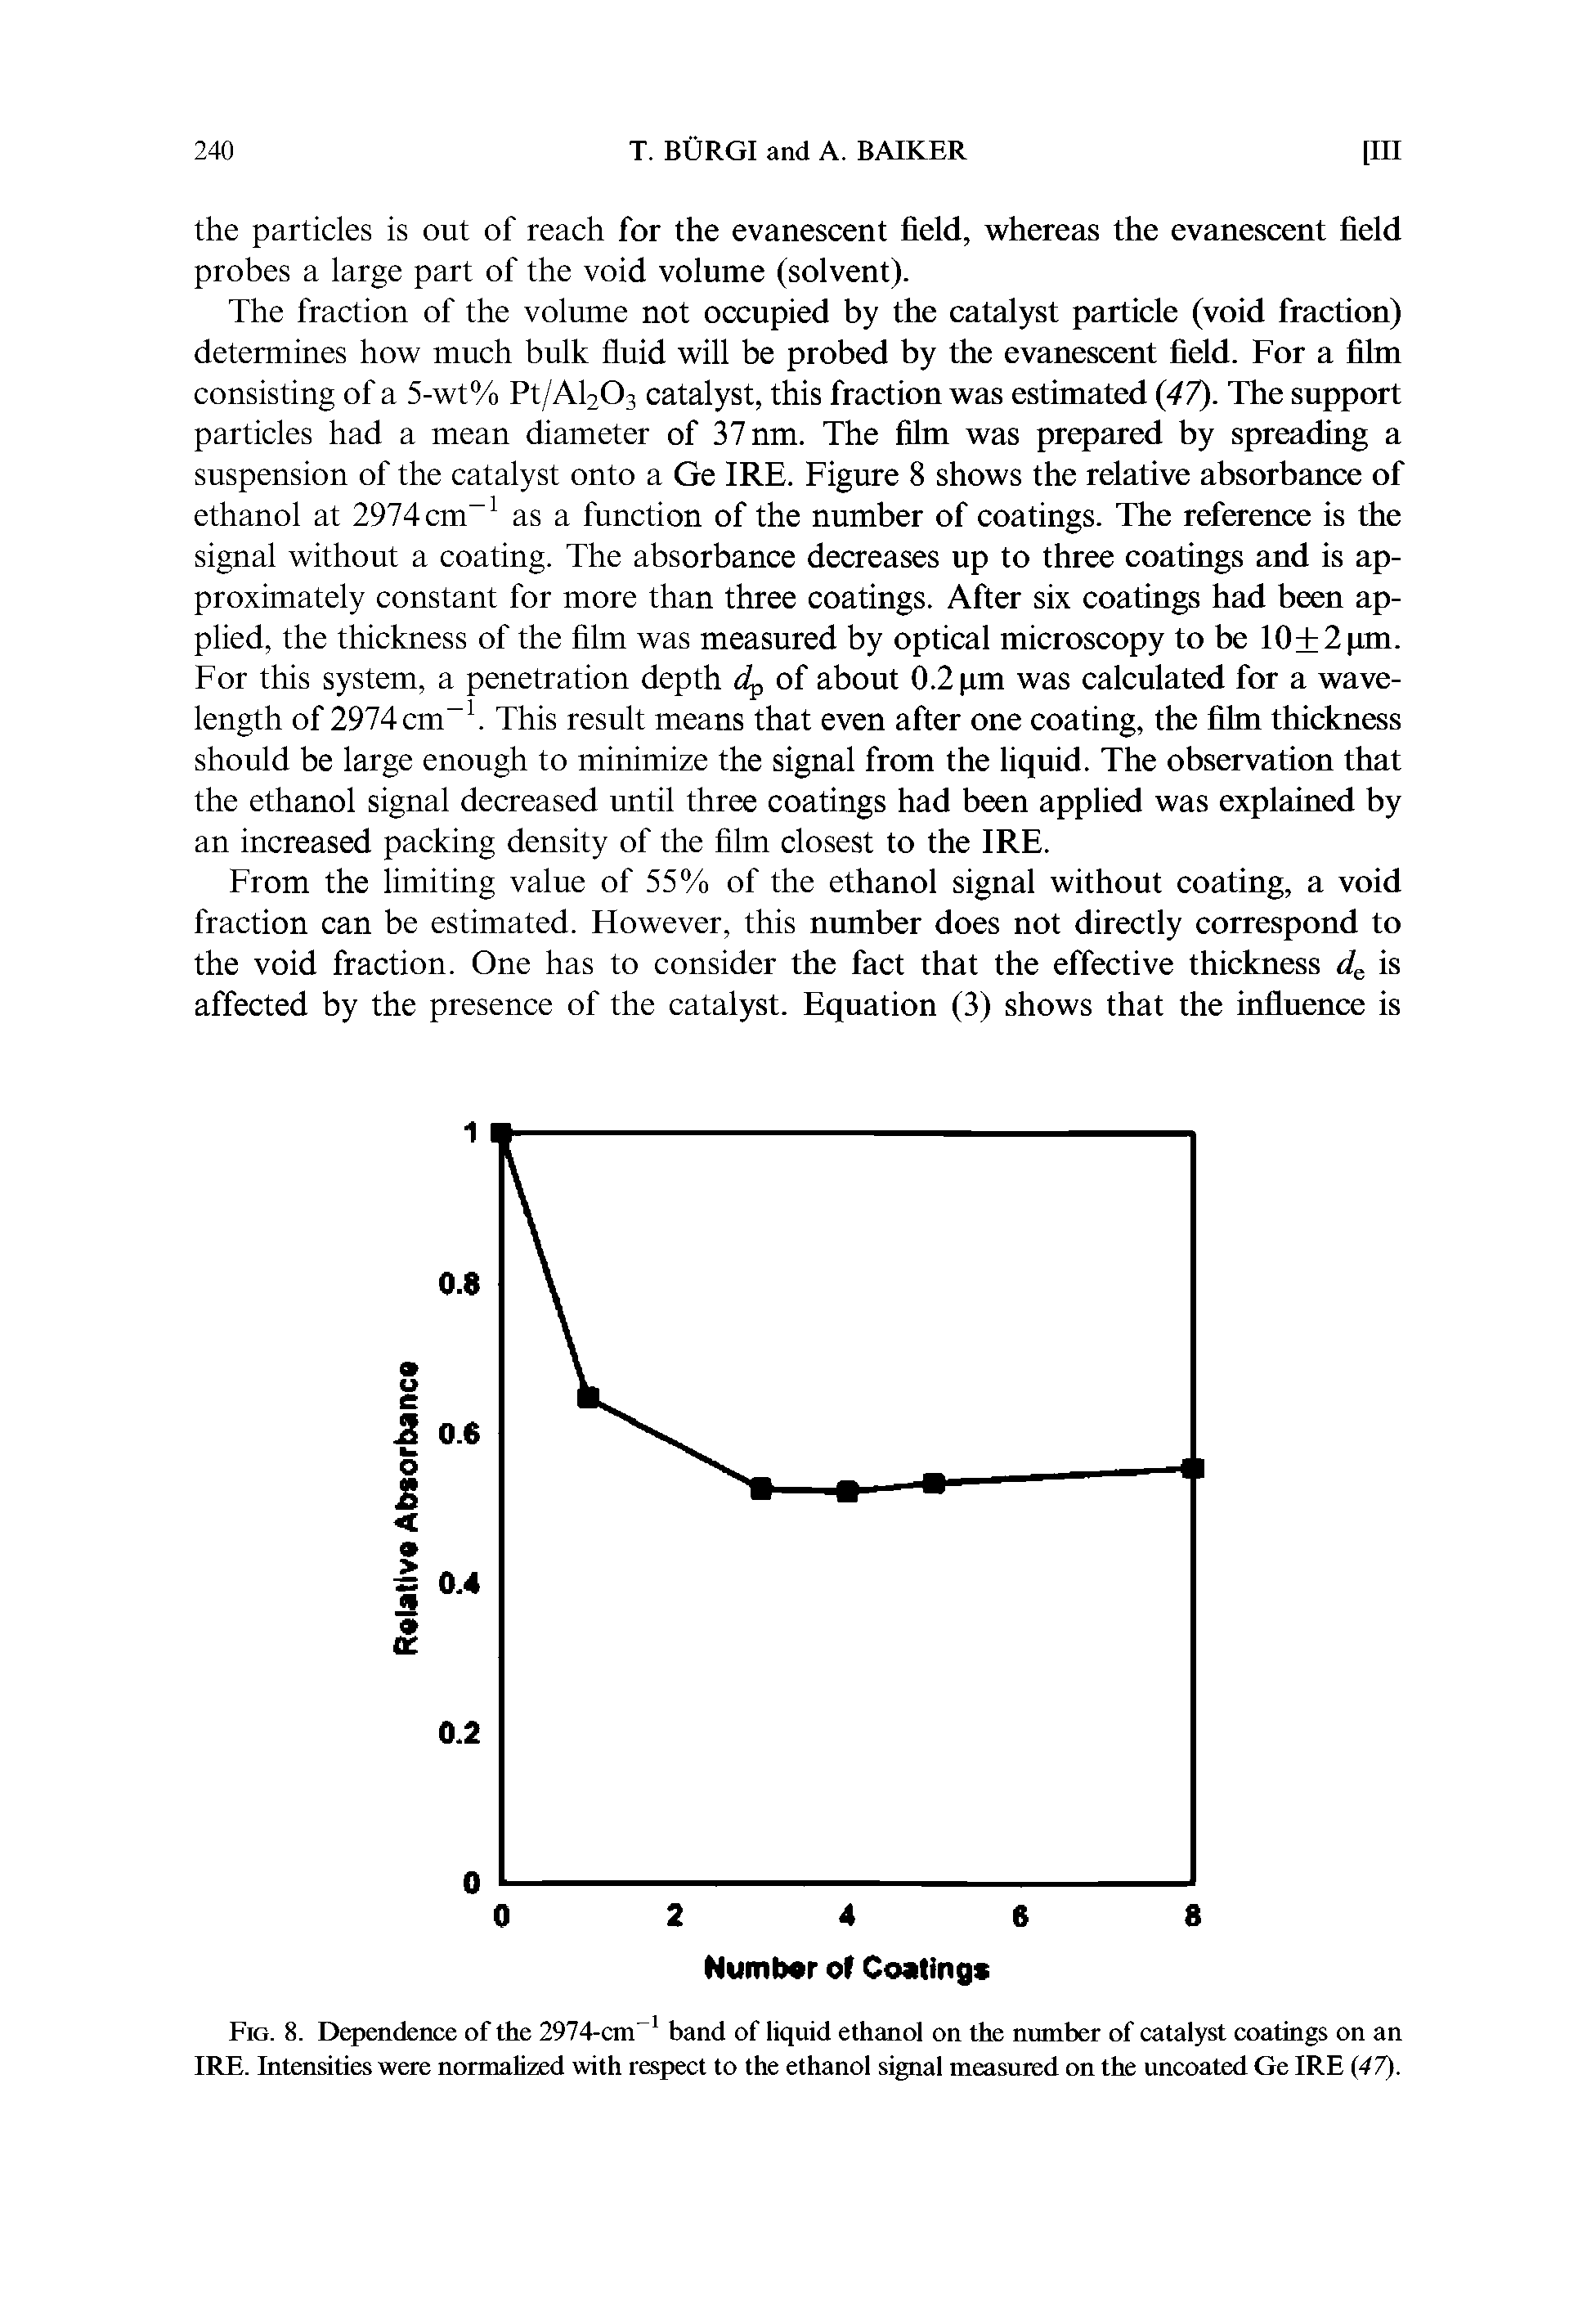 Fig. 8. Dependence of the 2974-cm band of liquid ethanol on the number of catalyst coatings on an IRE. Intensities were normalized with respect to the ethanol signal measured on the uncoated Ge IRE (47).